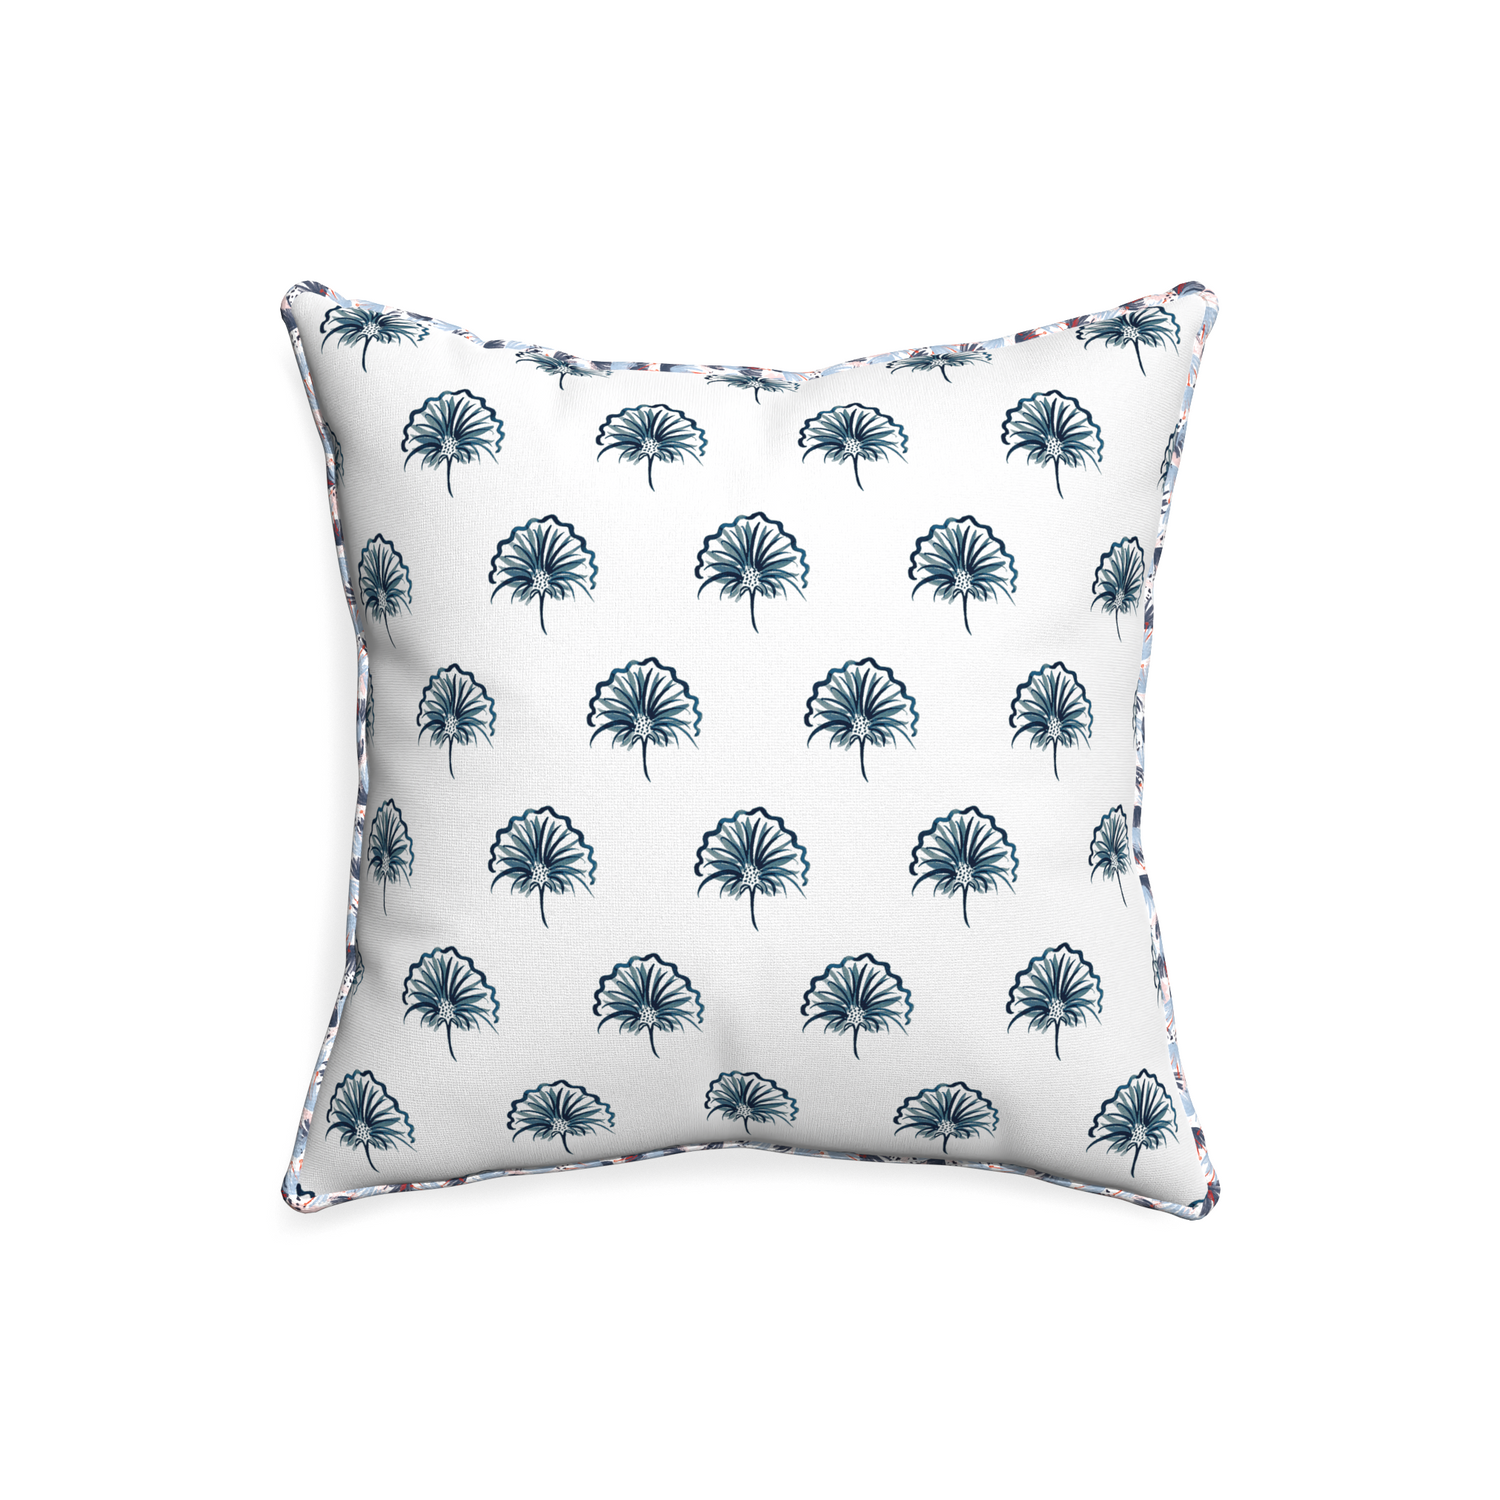 20-square penelope midnight custom pillow with e piping on white background